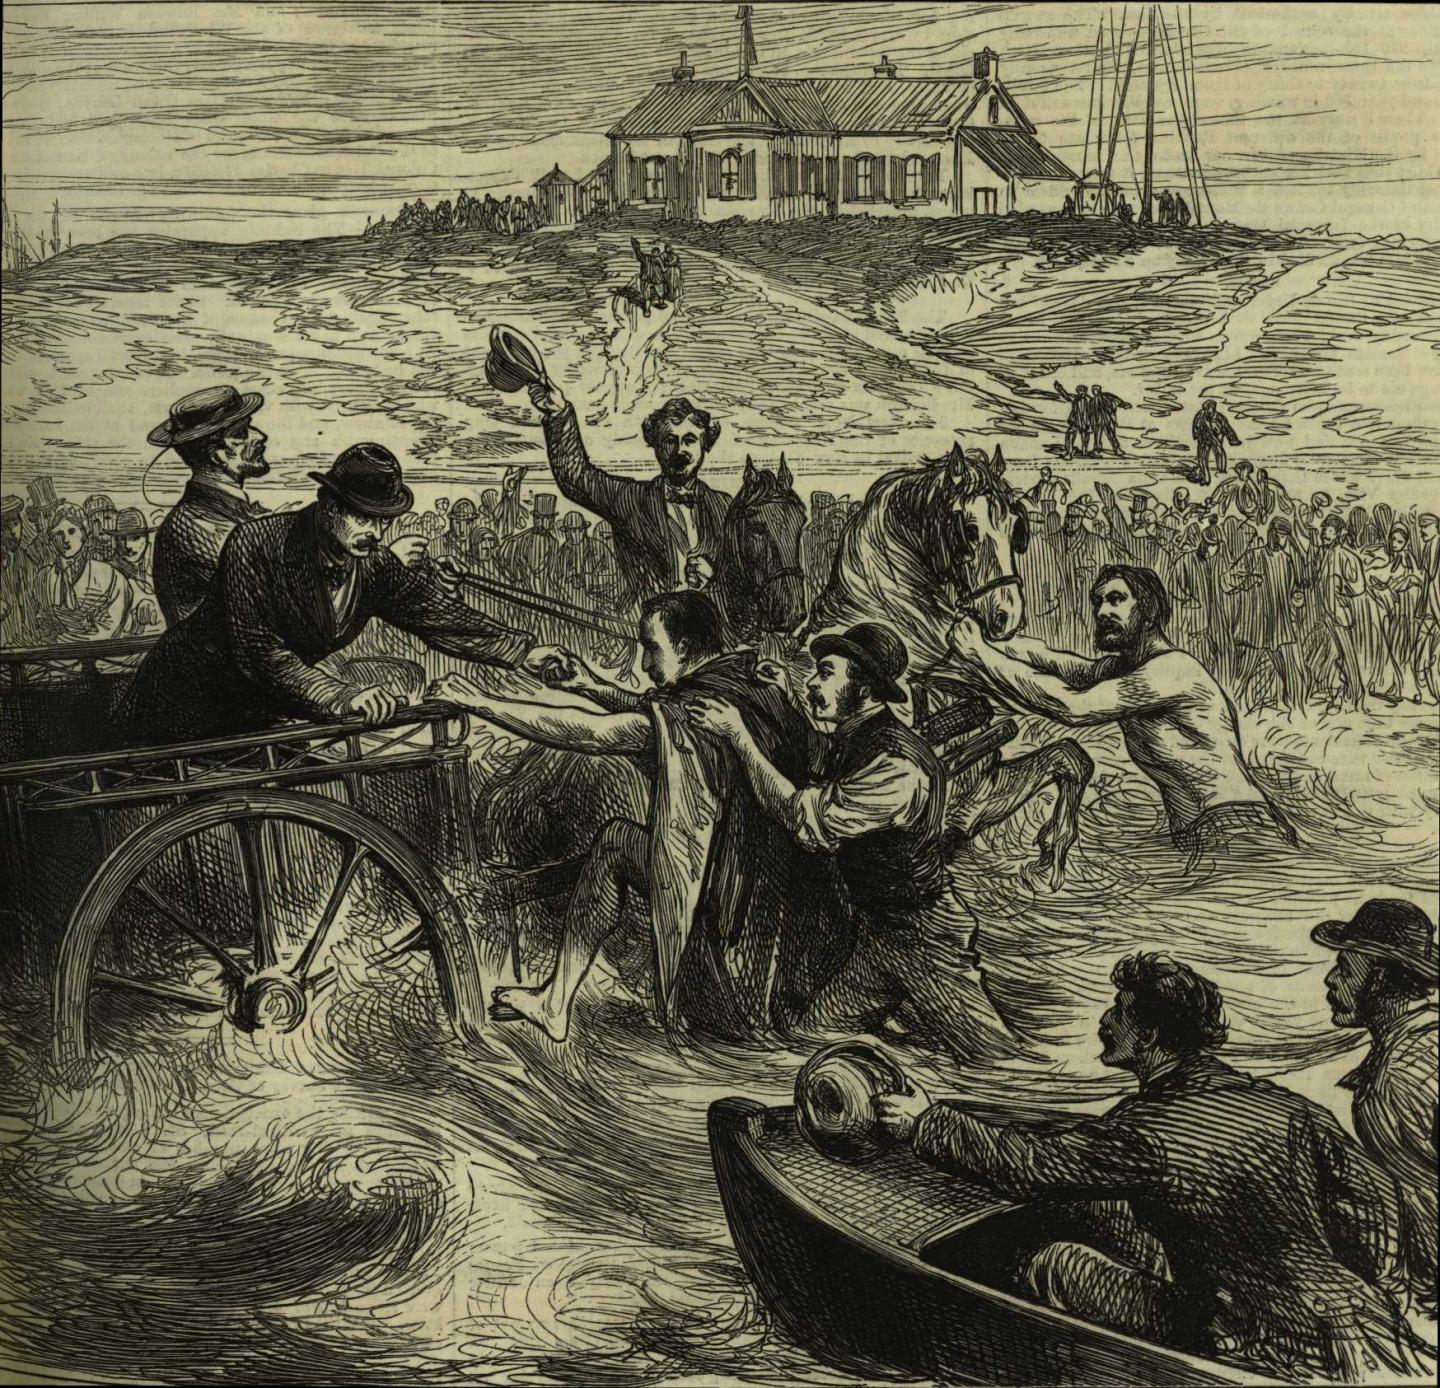  Webb landing at Calais from The Illustrated London News, 4 September 1875